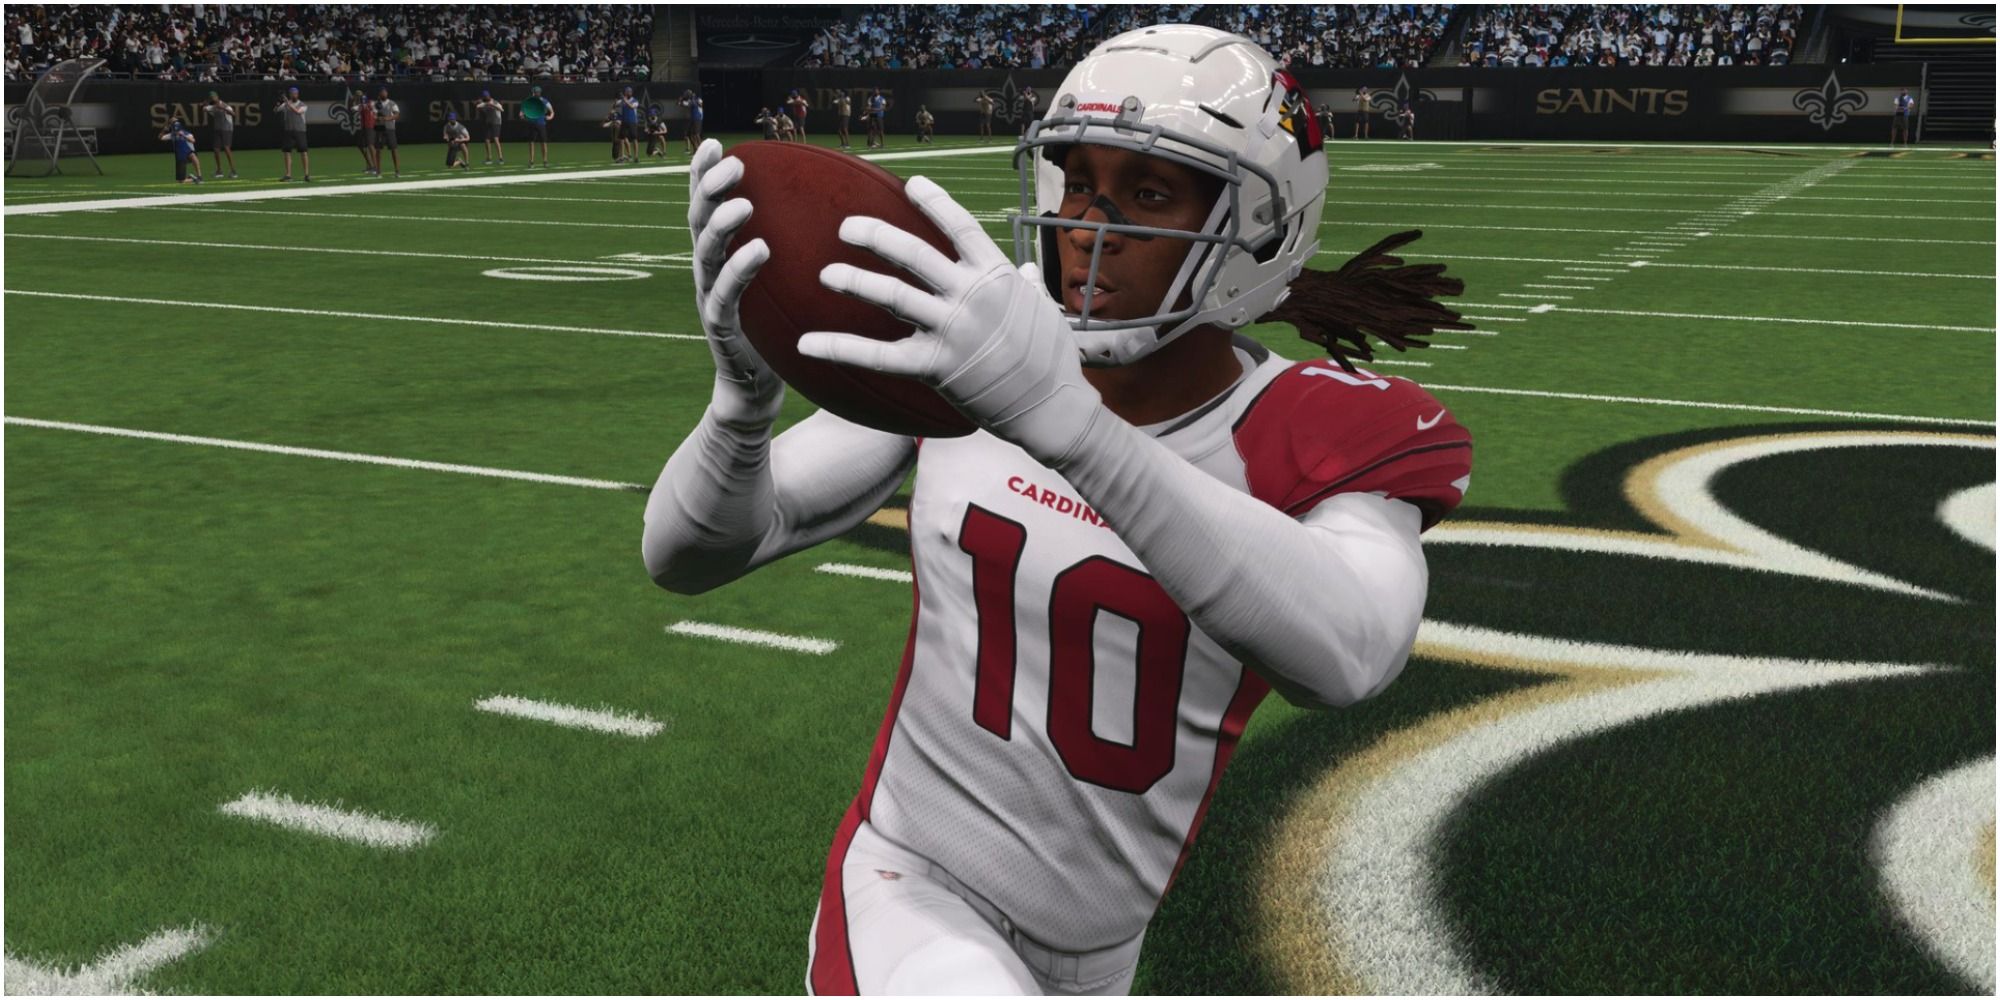 Madden NFL 22 DeAndre Hopkins Hauling In A Pass Downfield